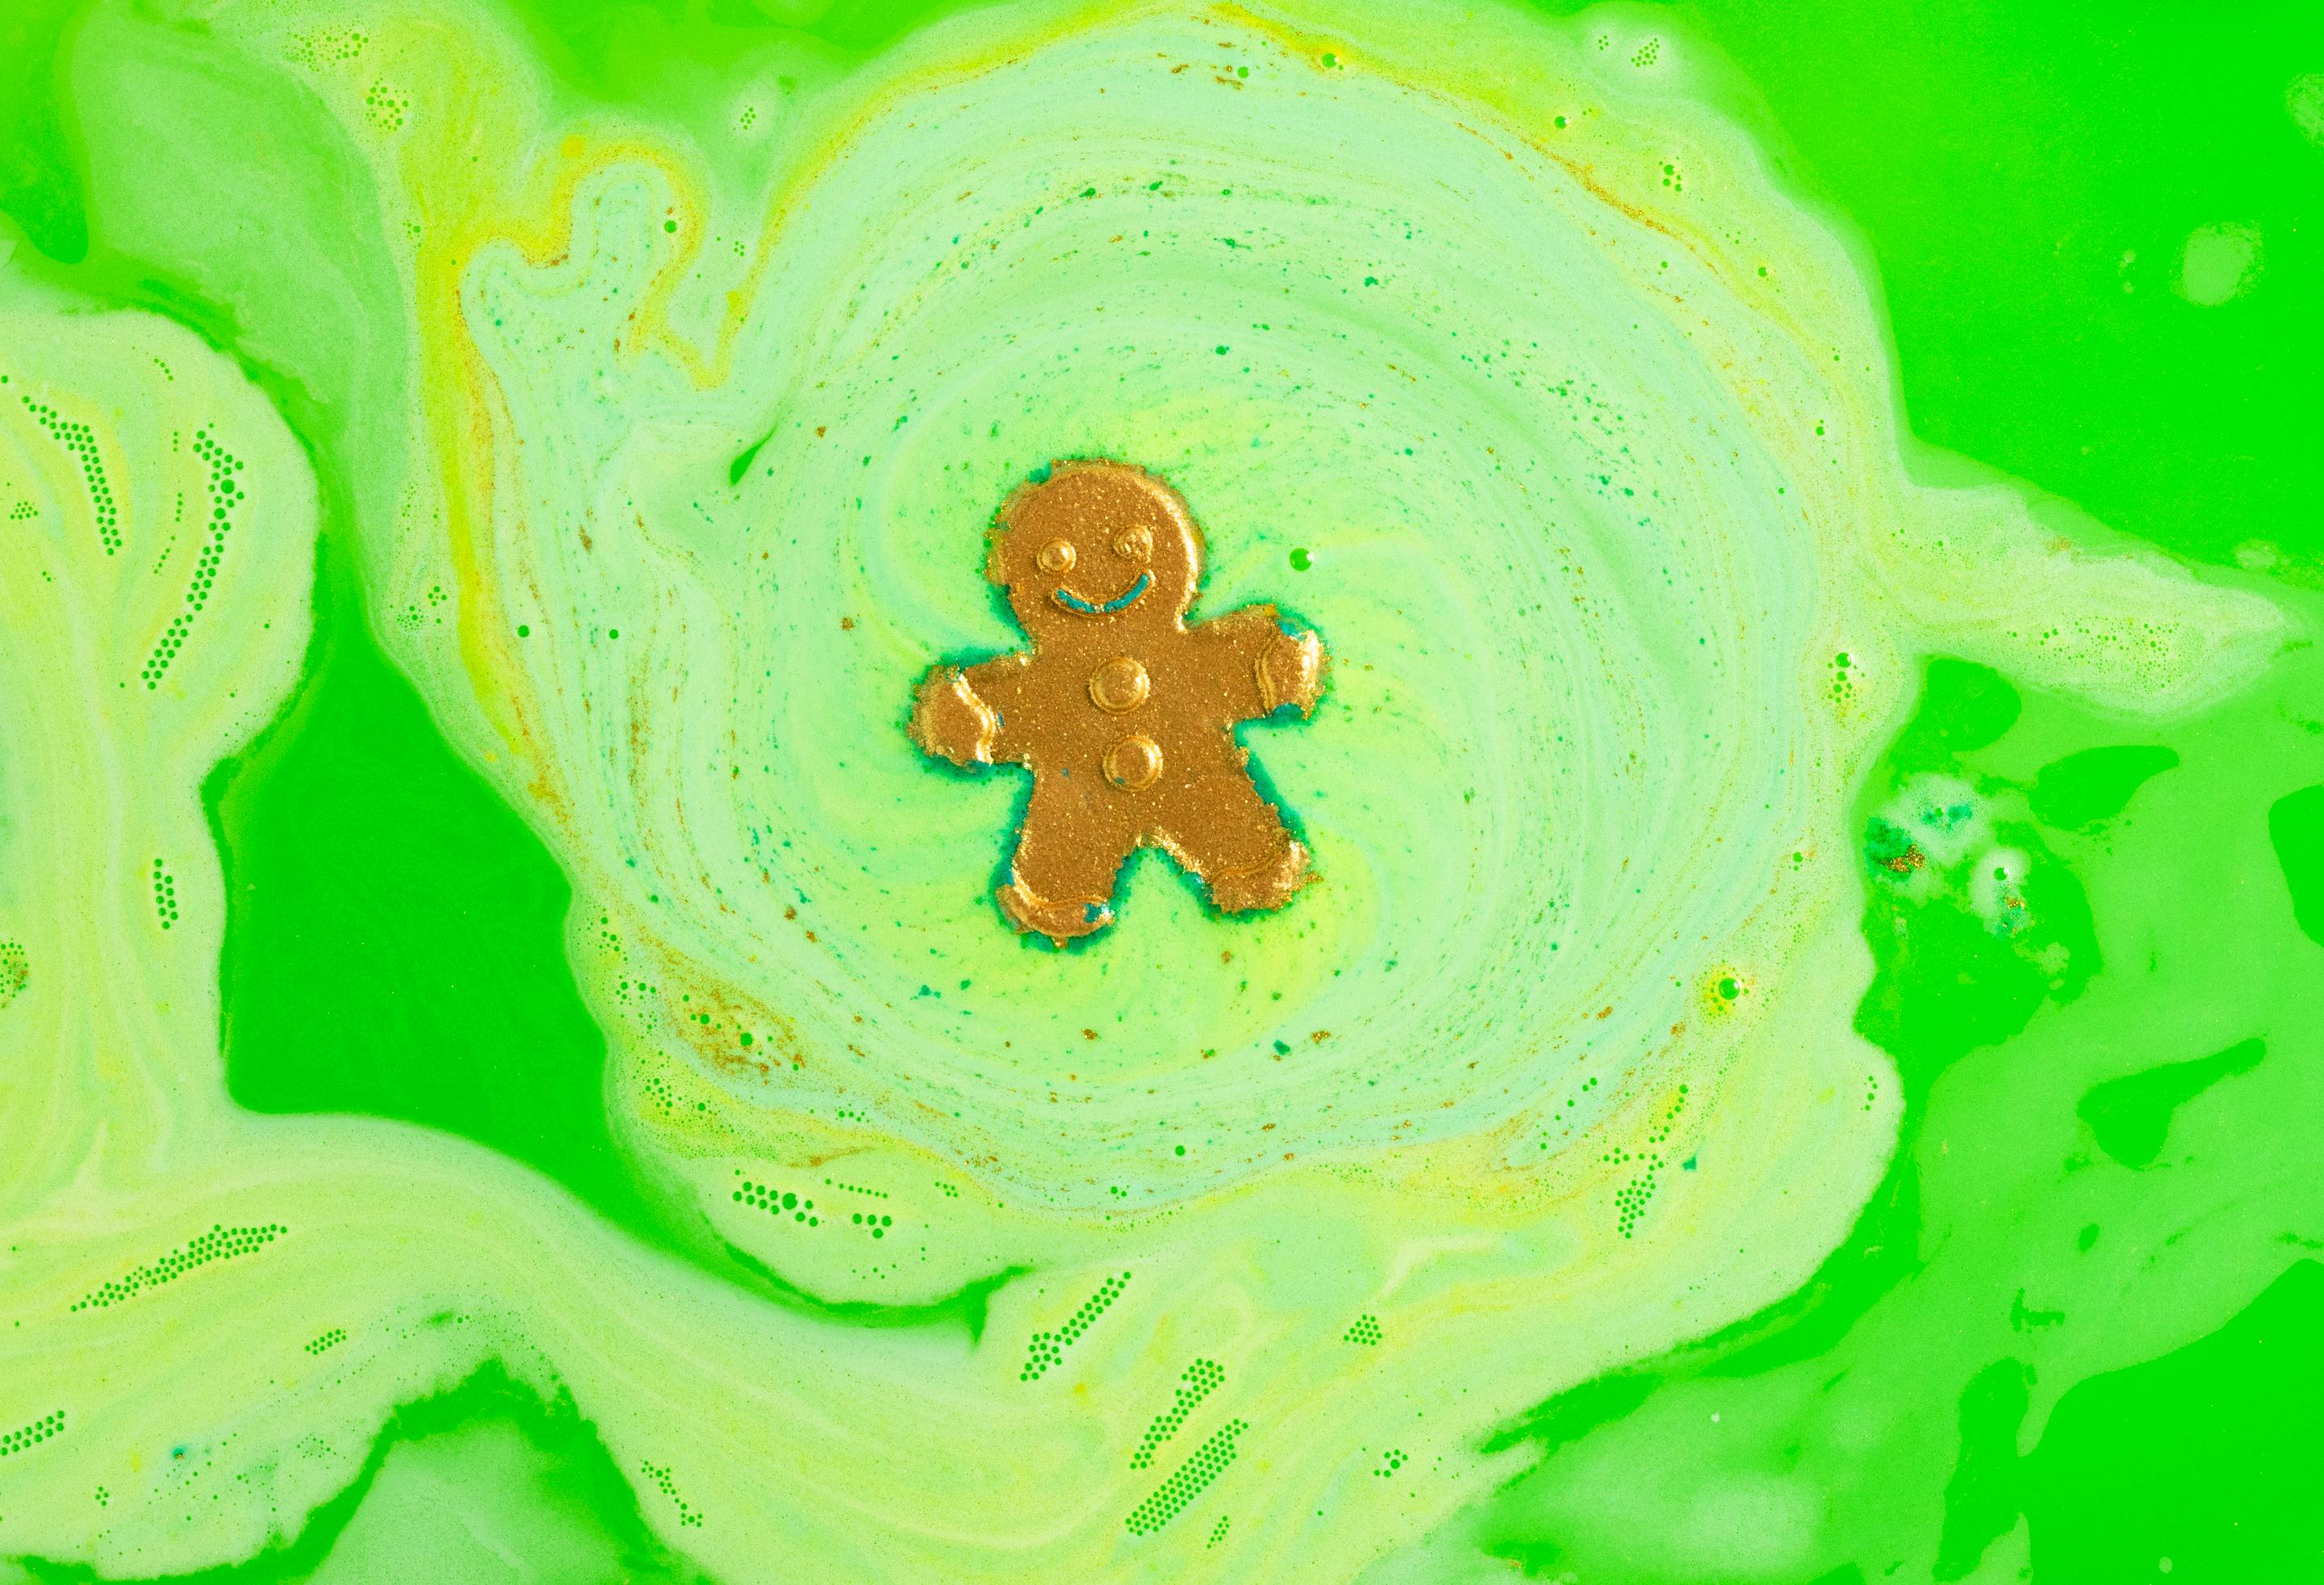 Image shows the Catch Me If You Can bath bomb dissolving, releasing yellow and green neon swirls.